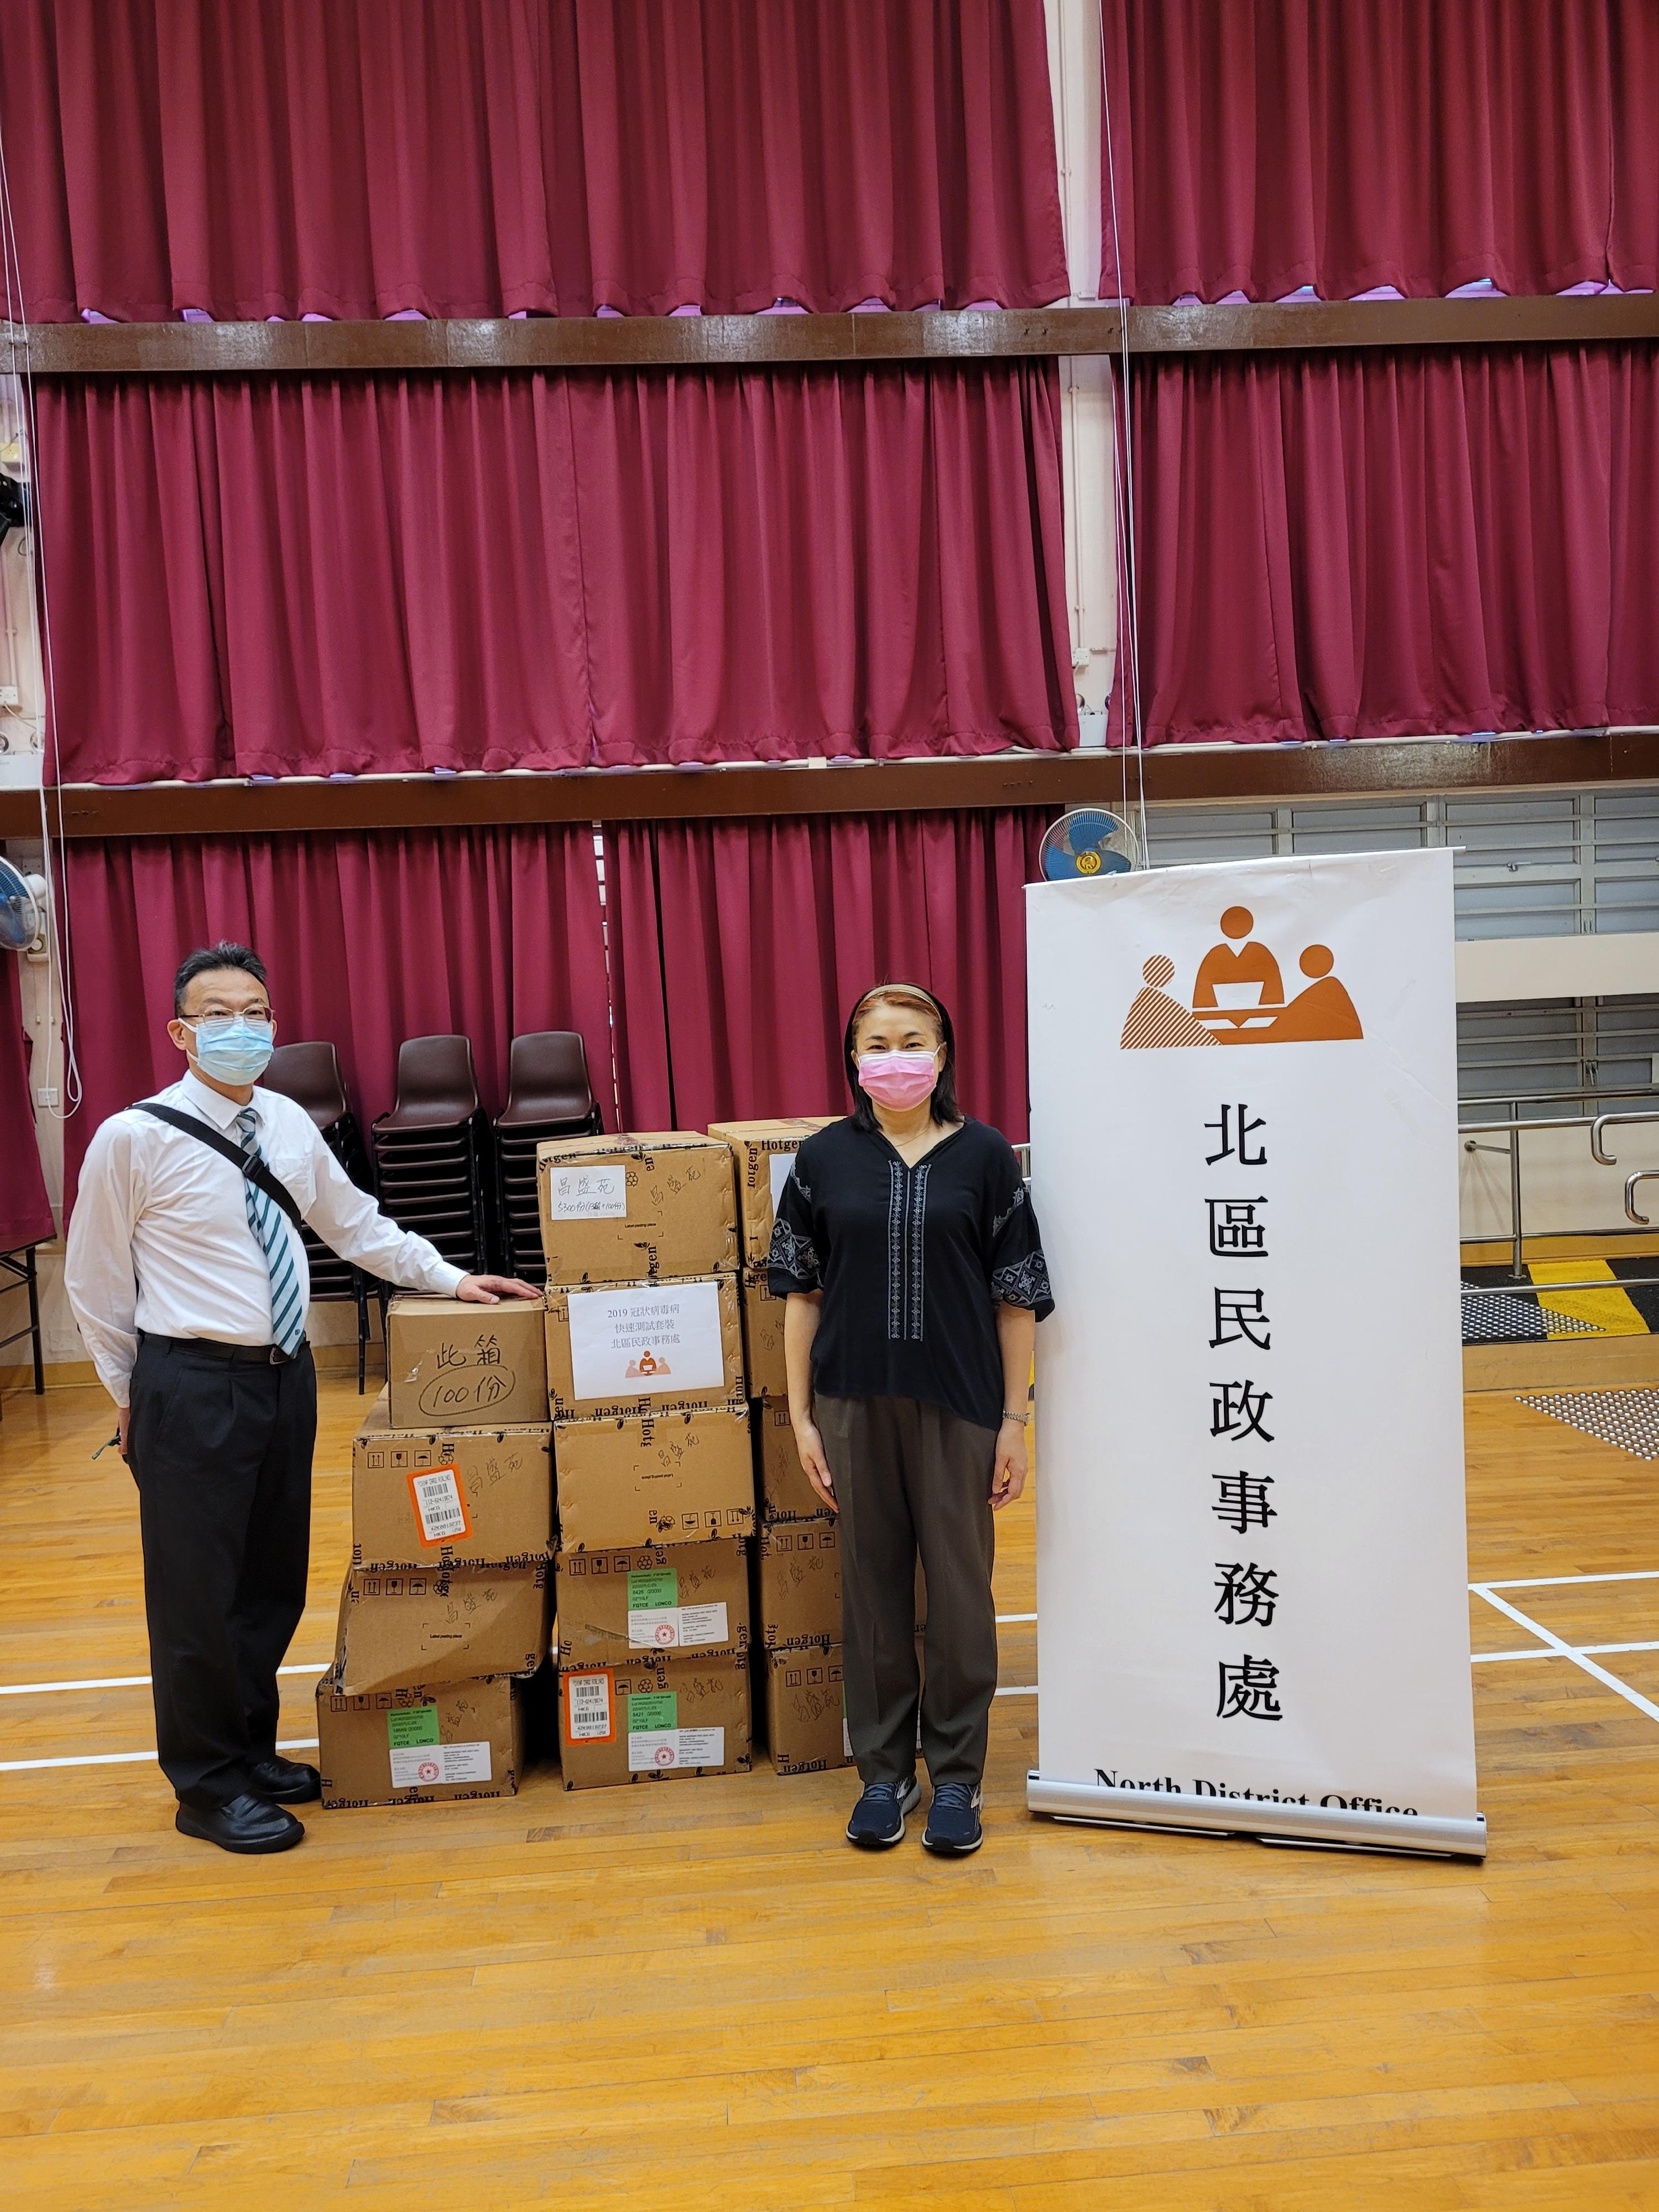 The North District Office today (March 15) distributed COVID-19 rapid test kits to households, cleansing workers and property management staff living and working in Cheong Shing Court for voluntary testing through the property management company.
